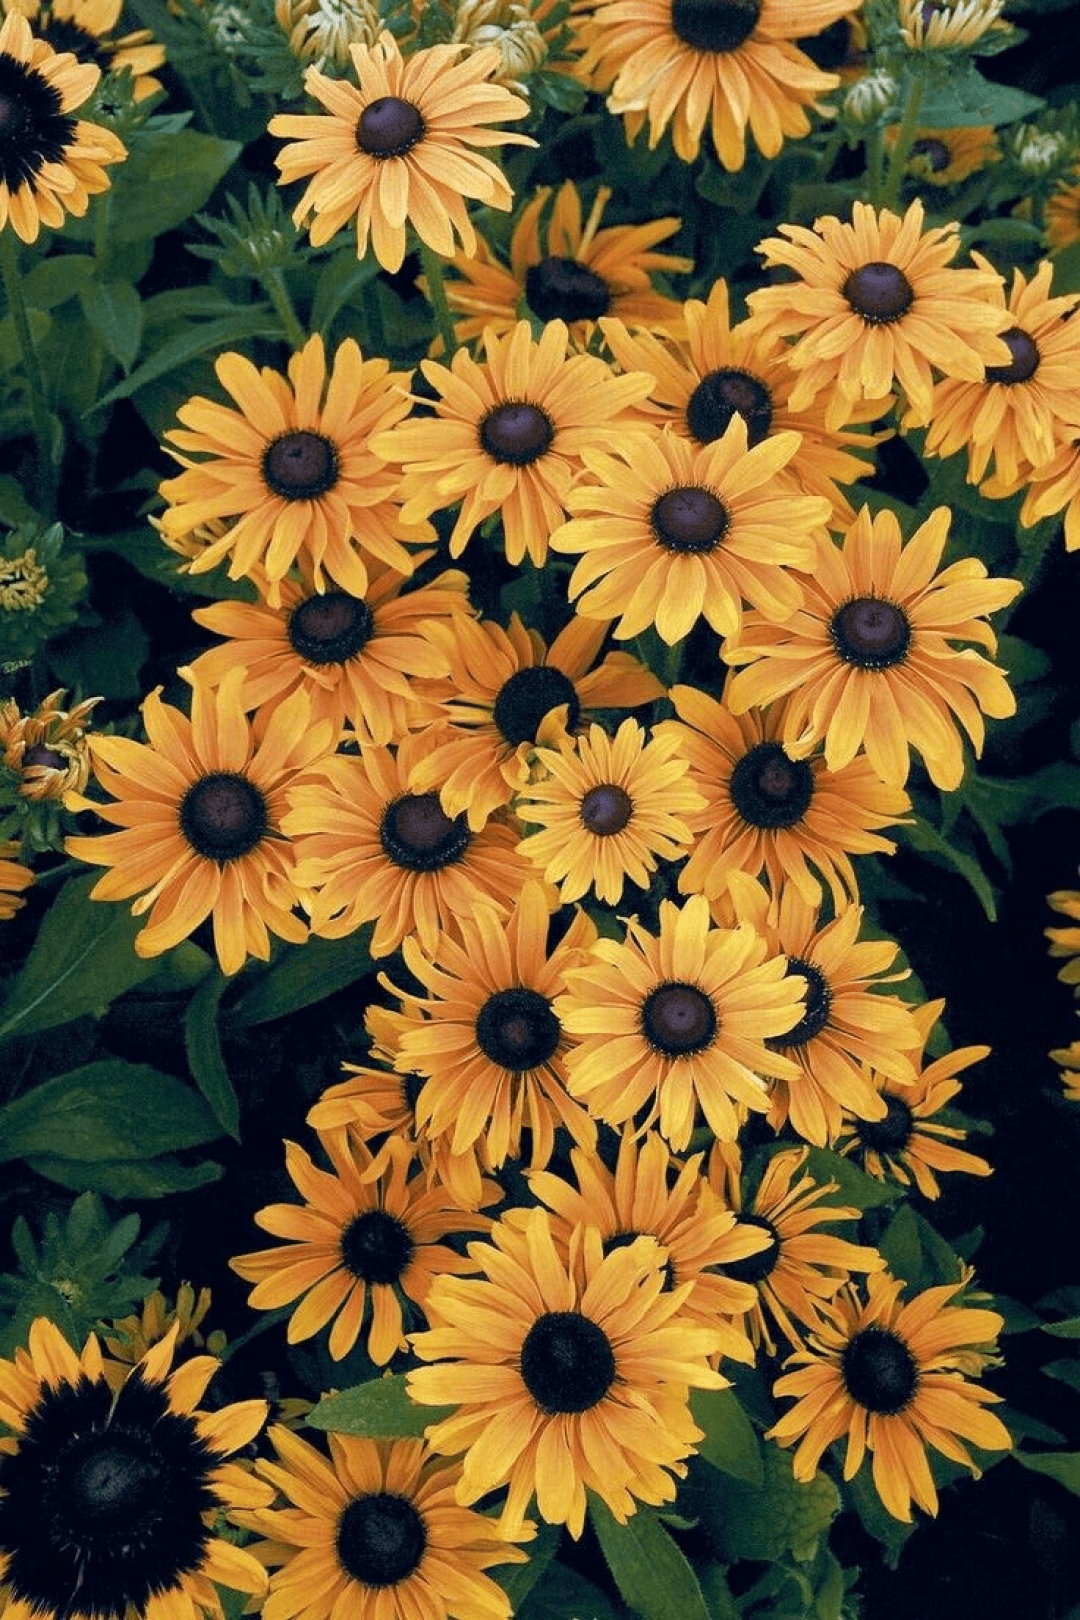 Yellow Aesthetic Sunflowers HD Wallpaper (Desktop Background / Android / iPhone) (1080p, 4k) (1080x1620) (2020)